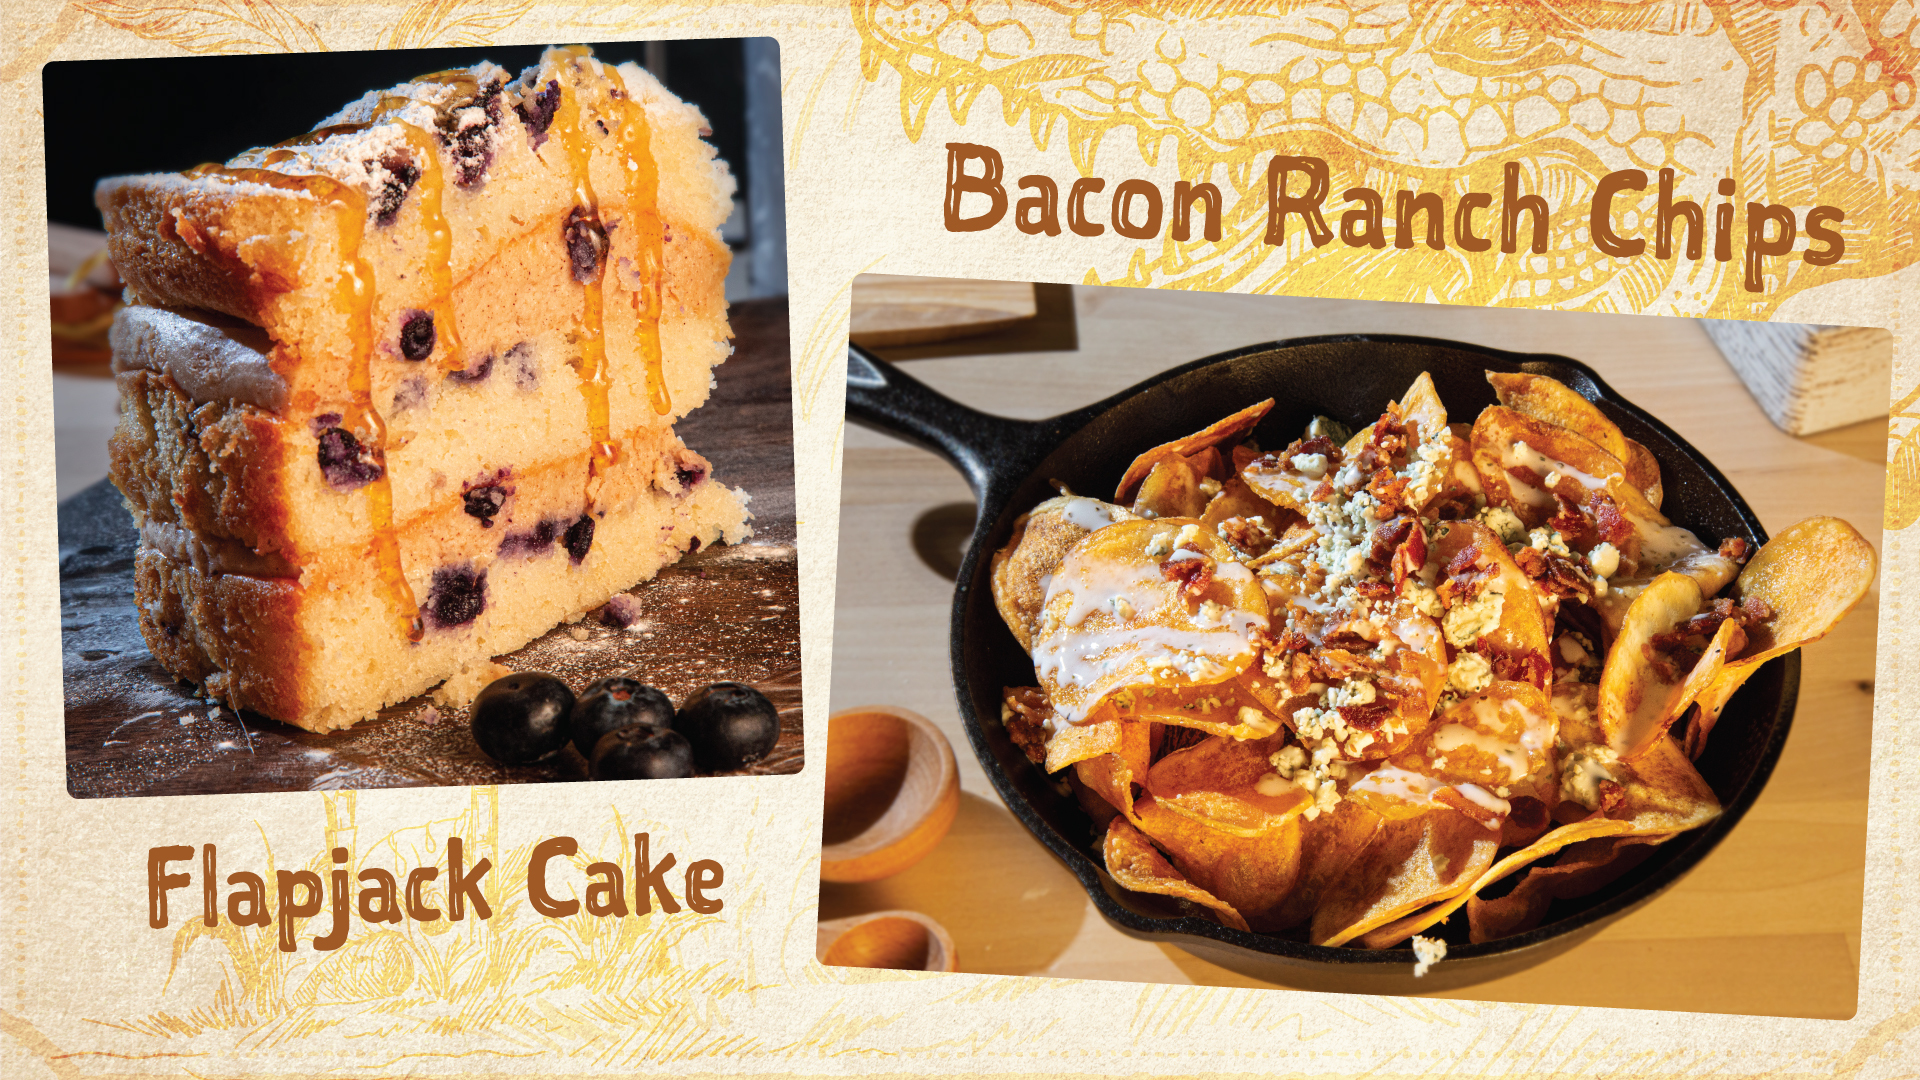 Flapjack cake & Bacon Ranch Chips